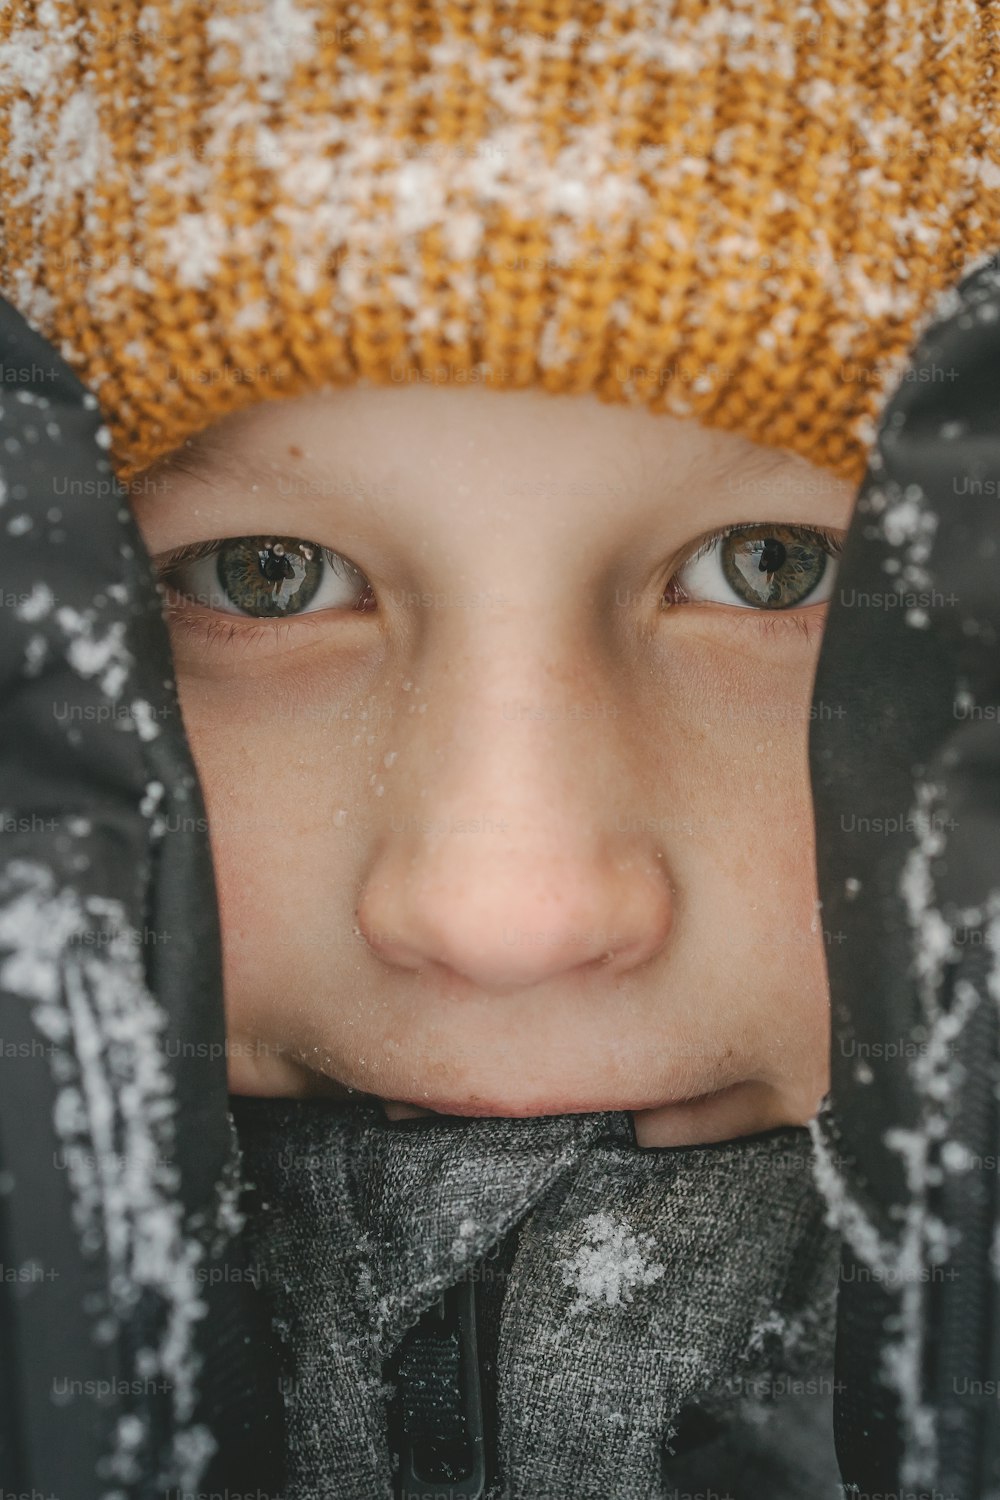 a young boy wearing a hat and gloves covered in snow